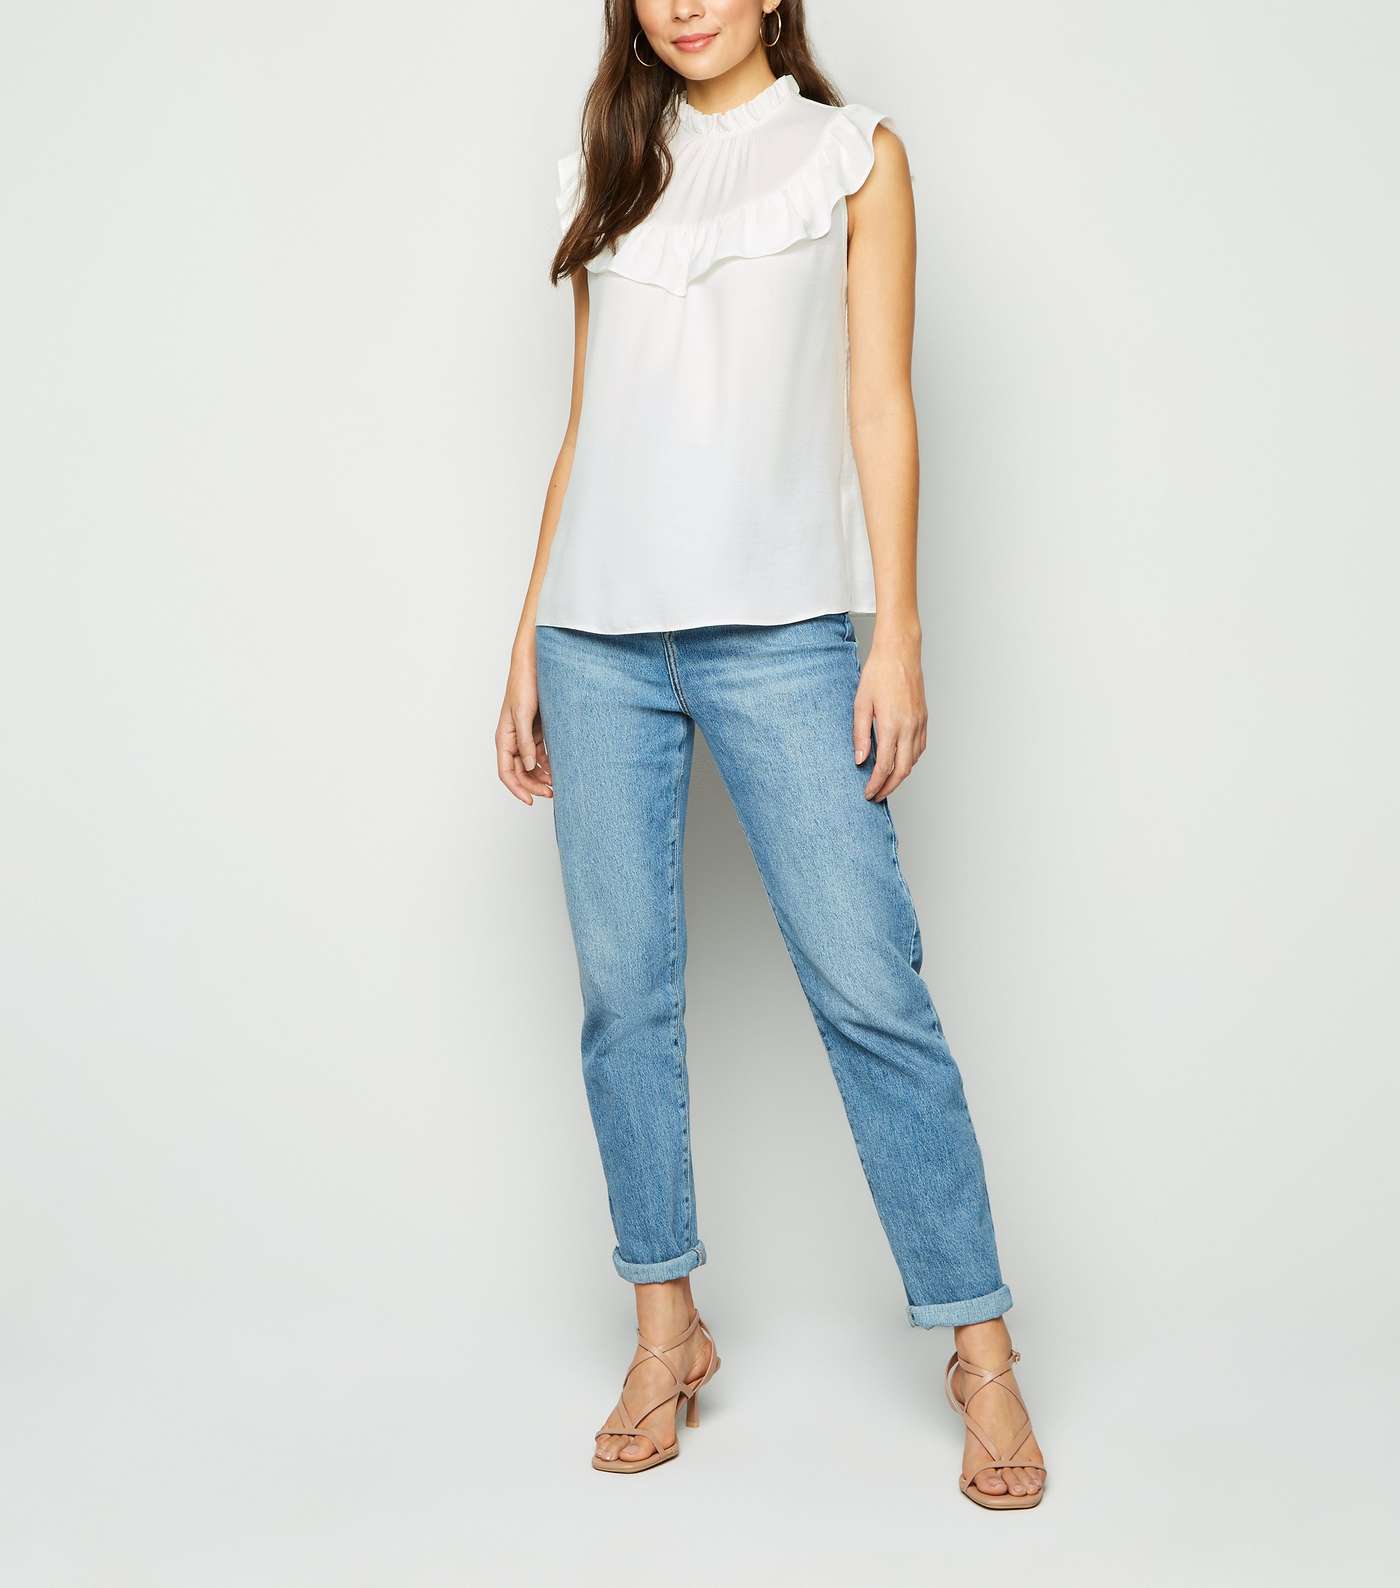 Off White Frill High Neck Blouse Image 2